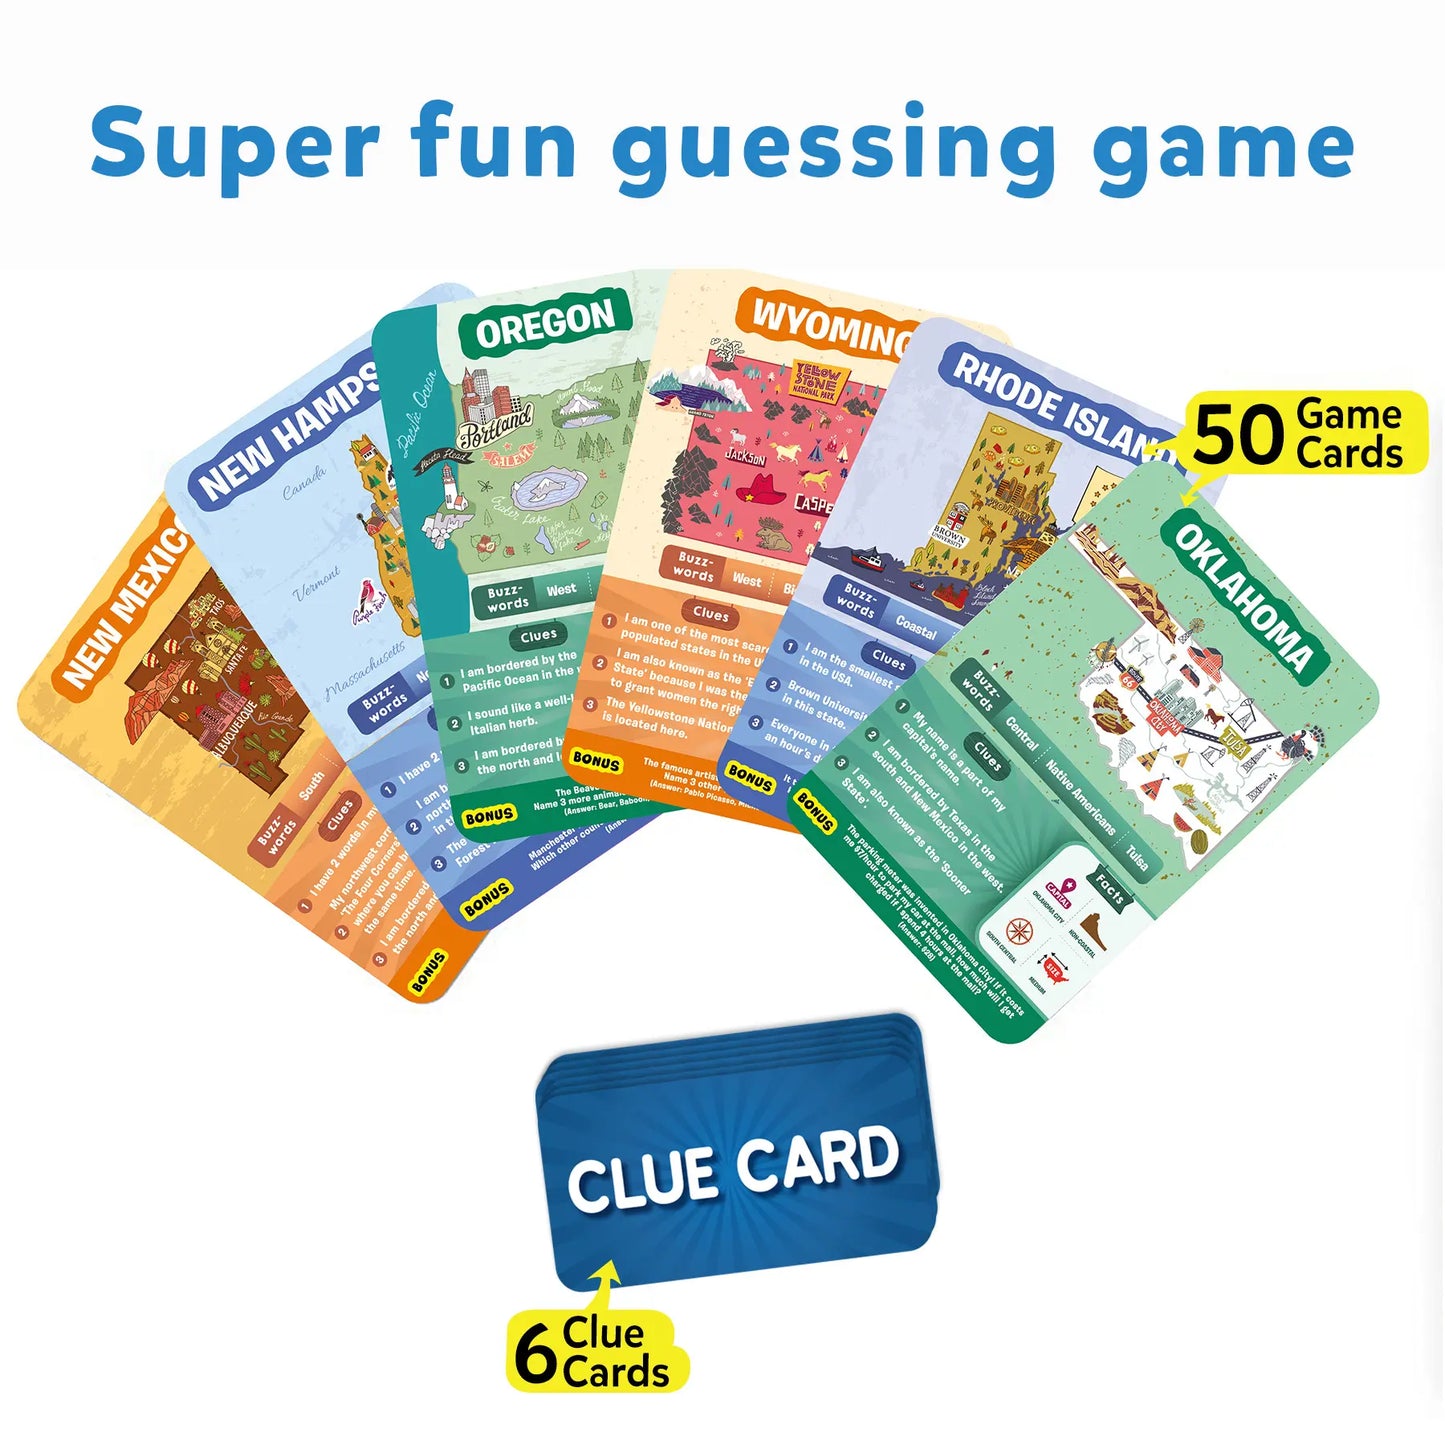 Skillmatics Card Game - Guess in 10 50 States, Gifts for Ages 8 and up